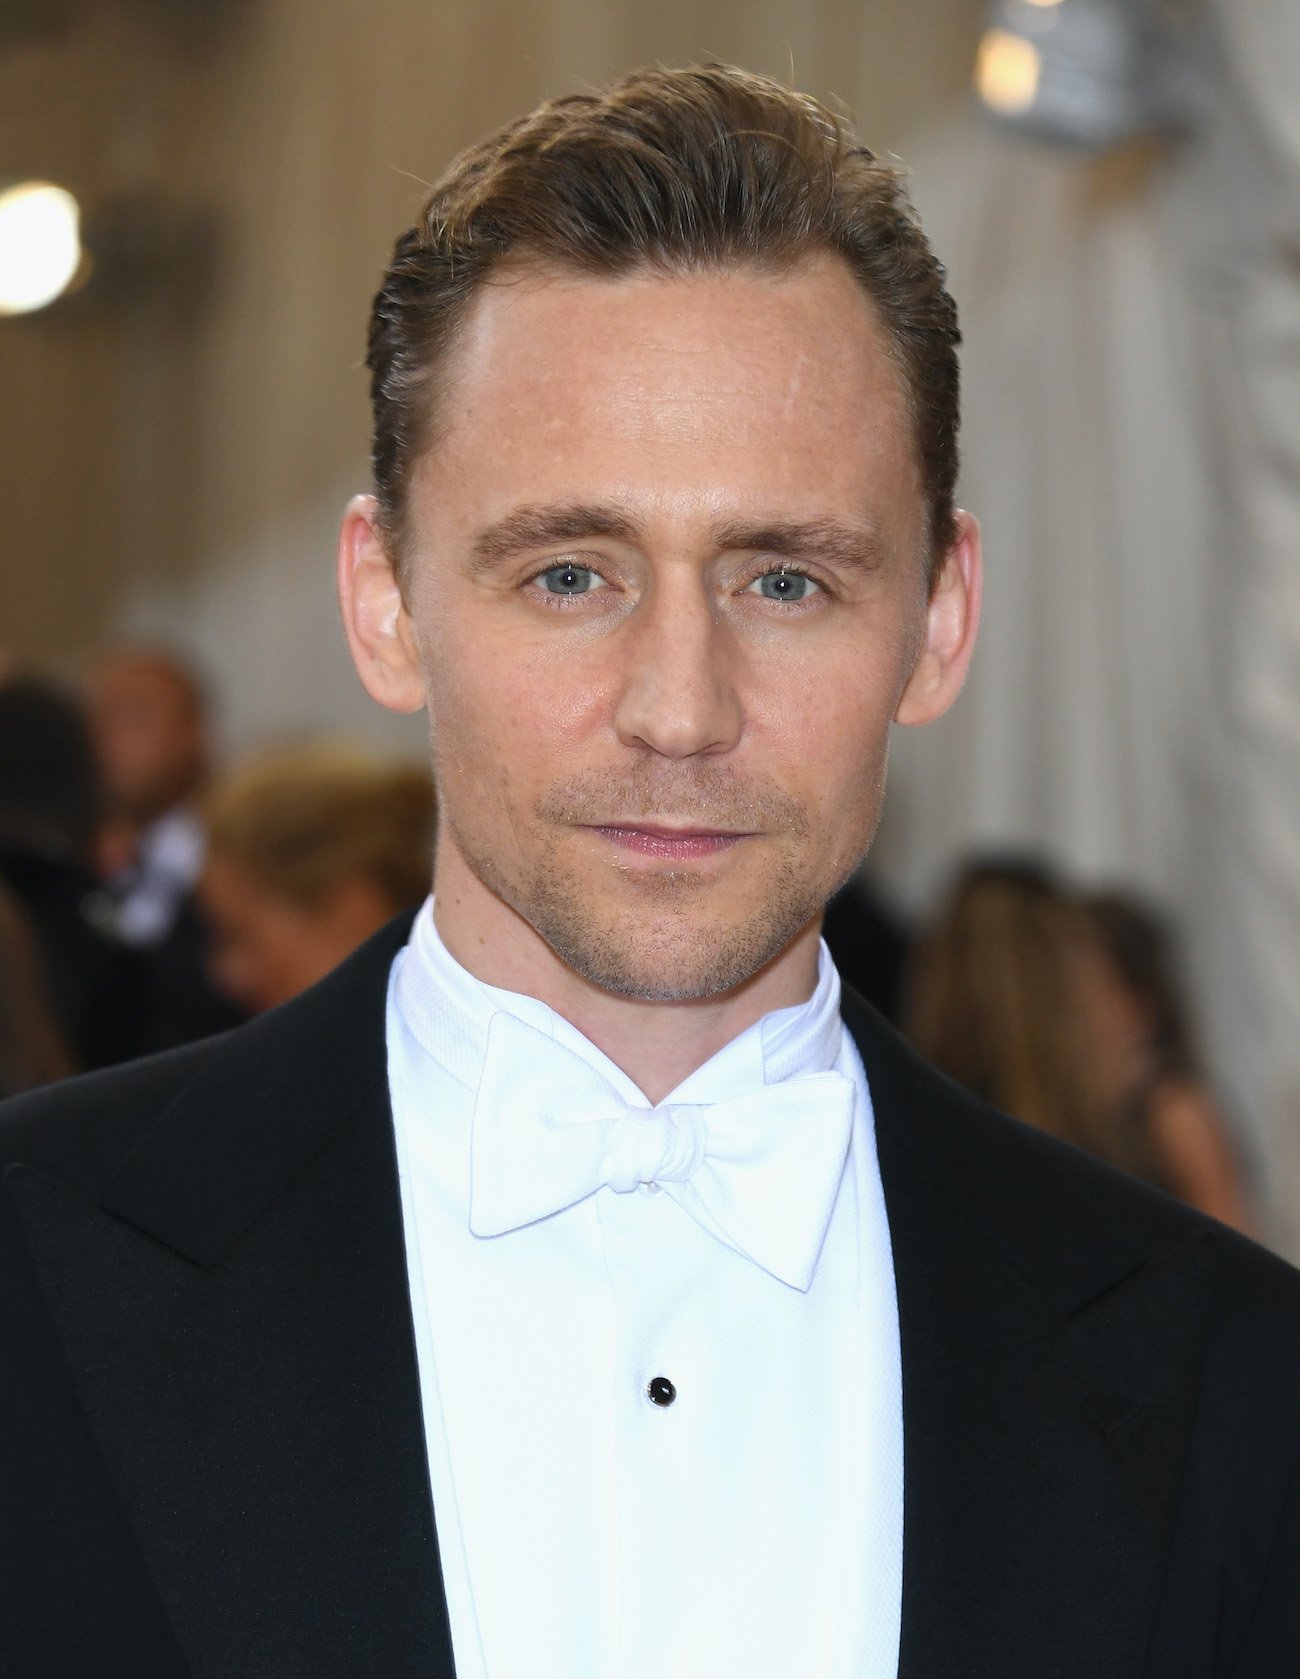 ‘Loki’ Star Tom Hiddleston on What He ‘Found Difficult’ Transitioning from Stage to Screen